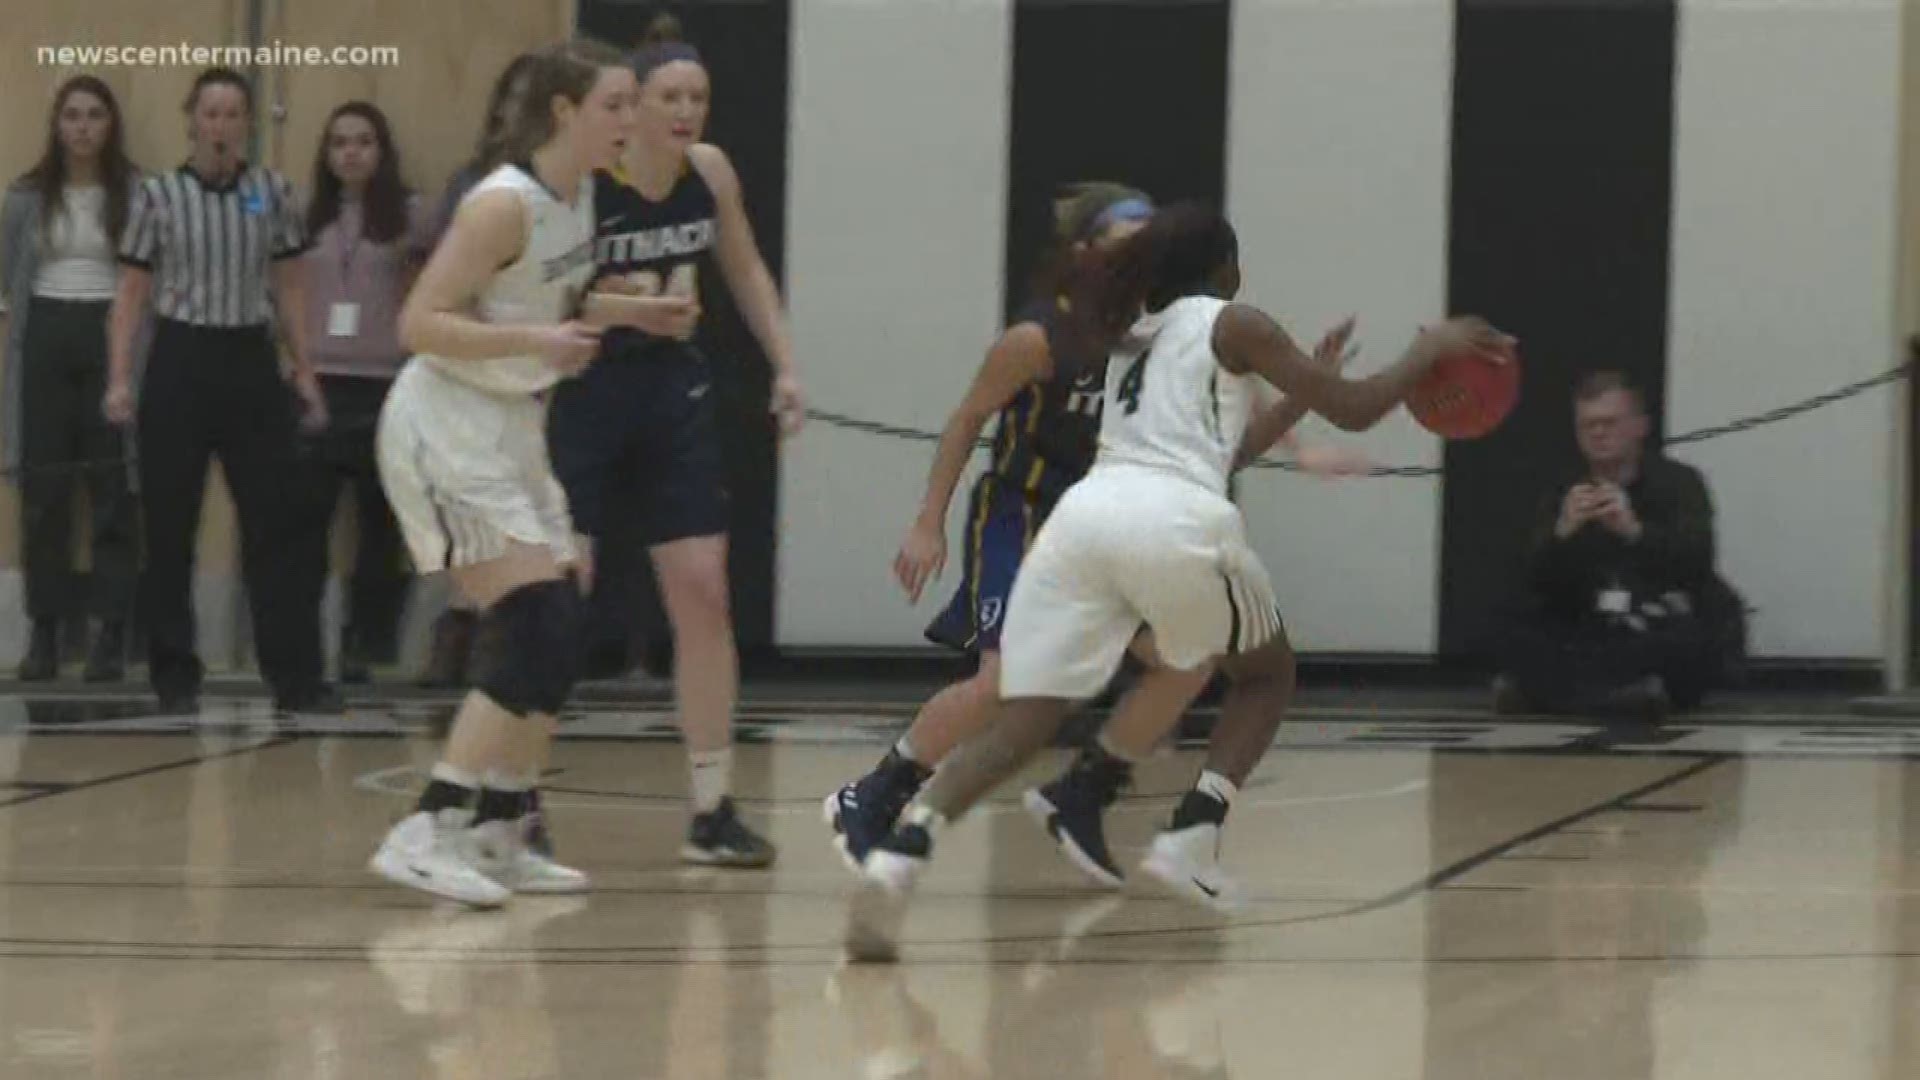 For the second year in a row, the Bowdoin women's basketball team is headed to the final four.